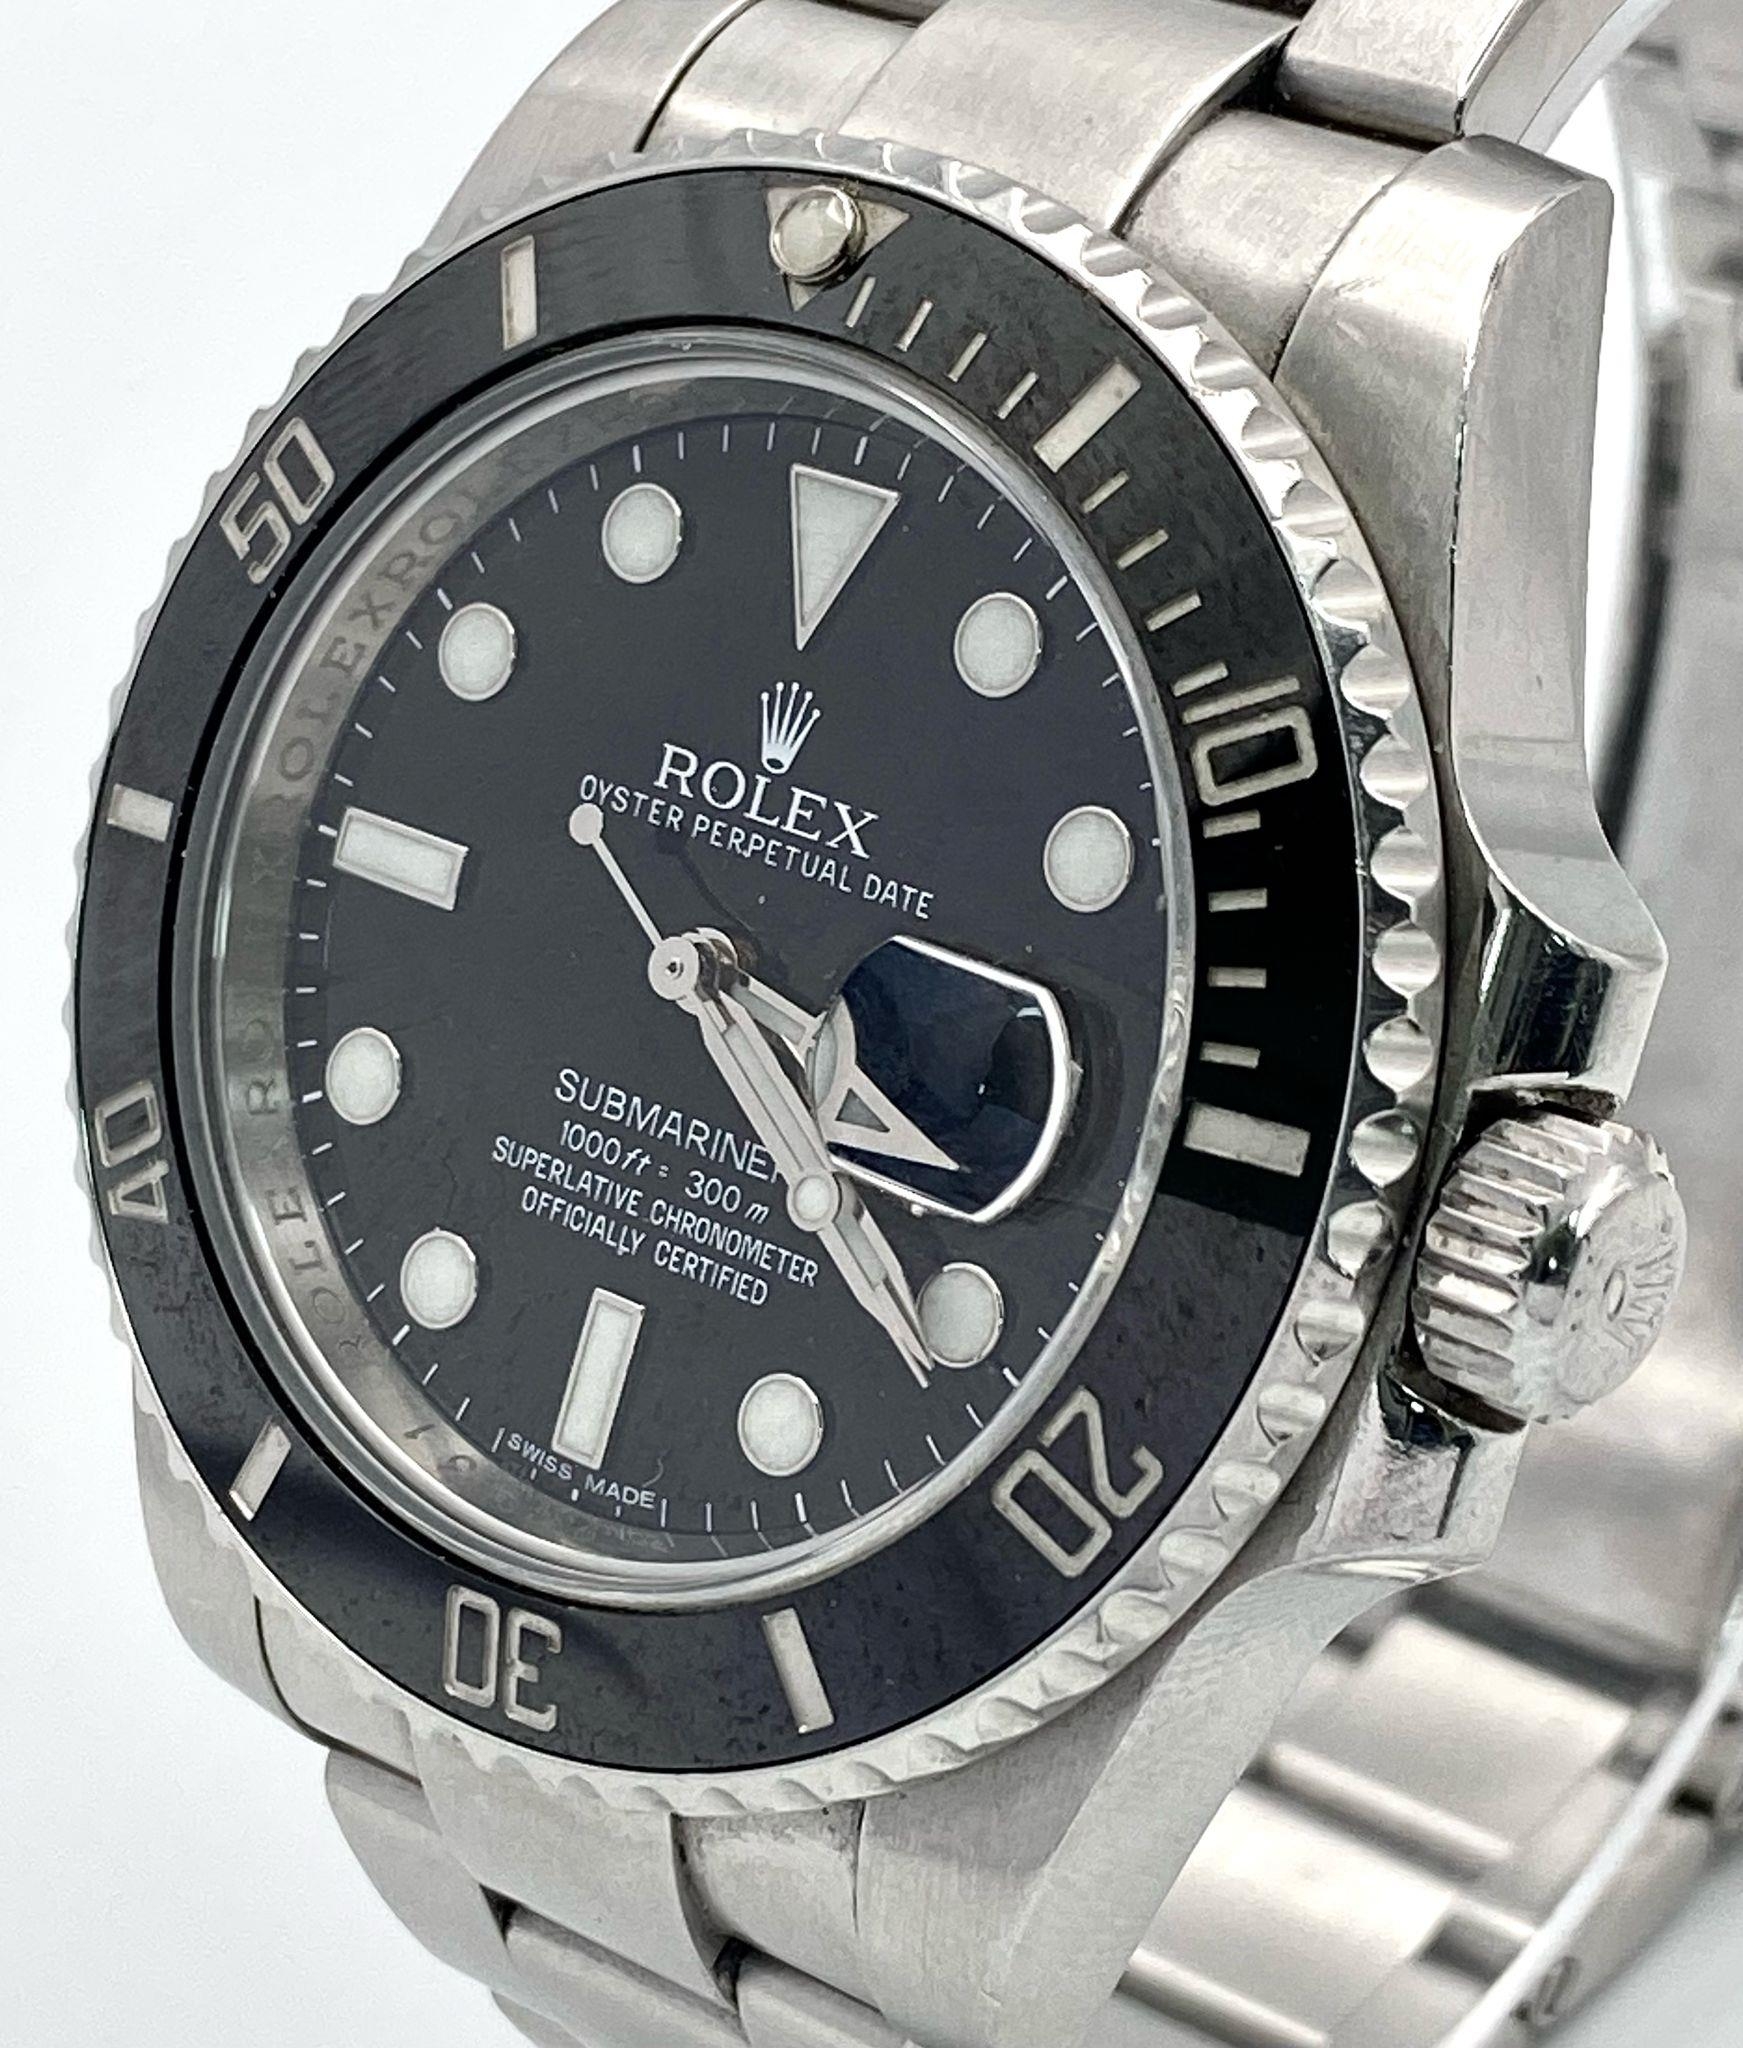 A Rolex Submariner Date Automatic Gents Watch. Stainless steel bracelet and case - 41mm. Black - Image 4 of 11